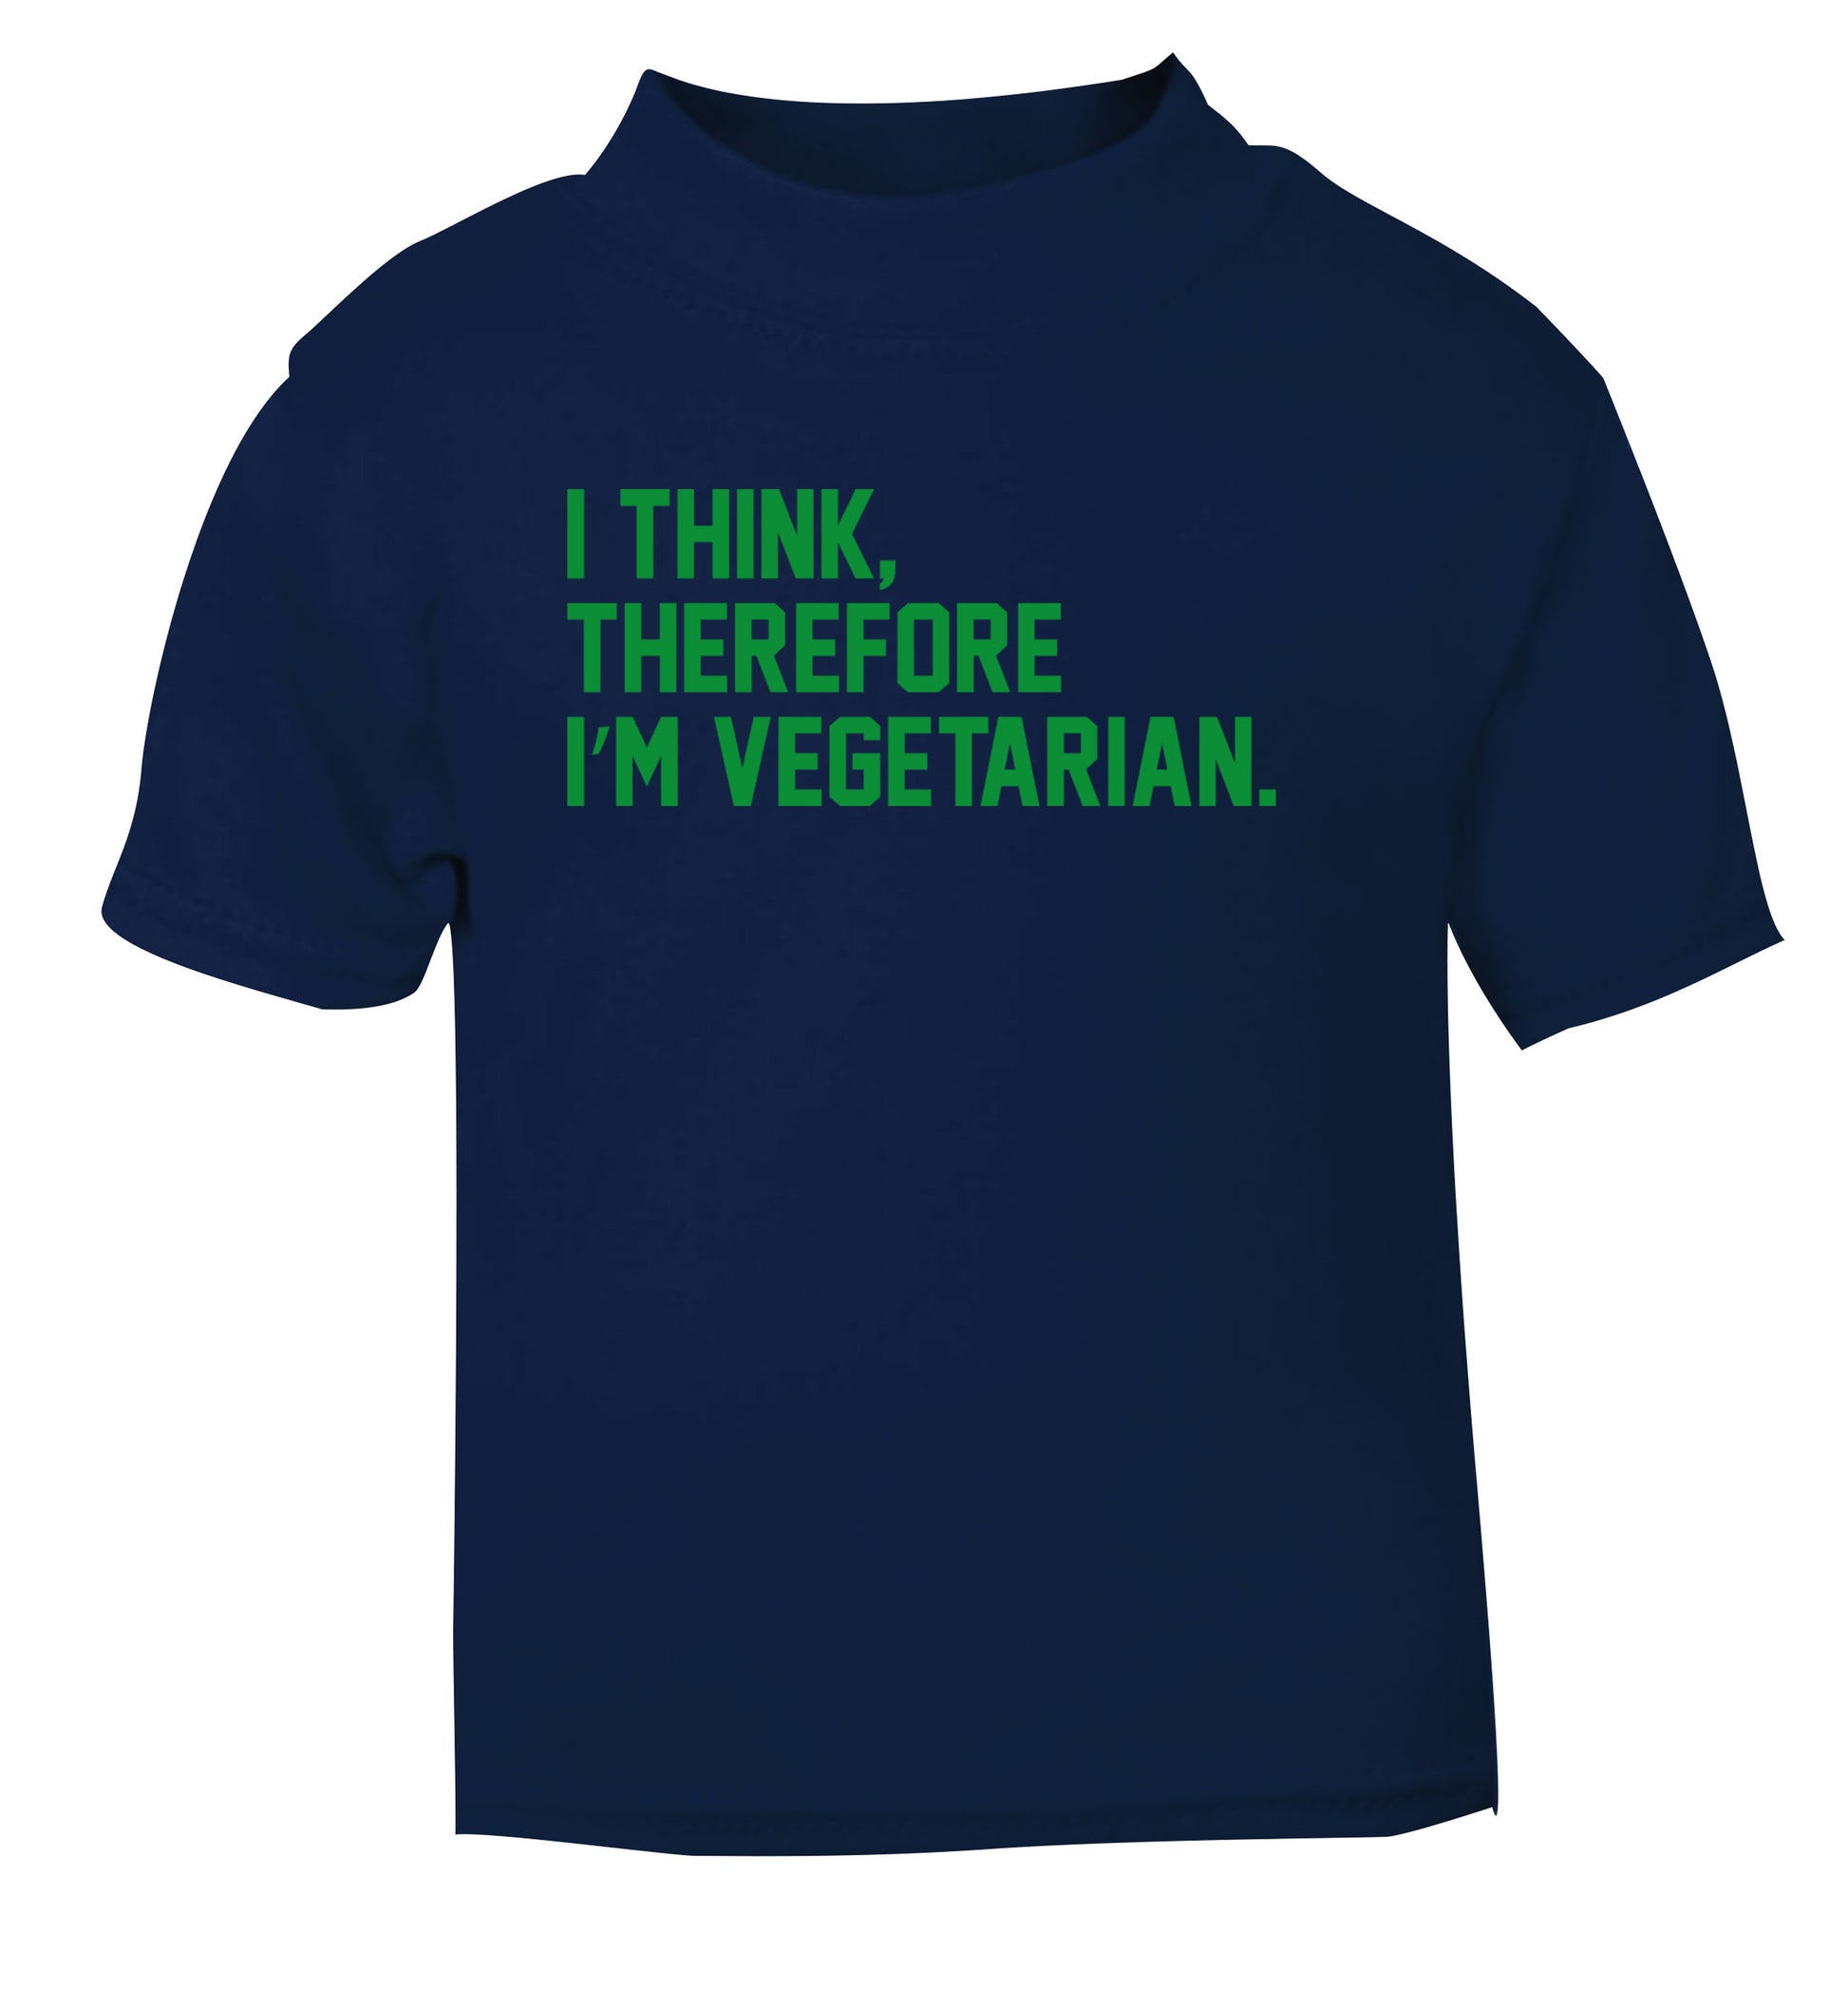 I think therefore I'm vegetarian navy Baby Toddler Tshirt 2 Years